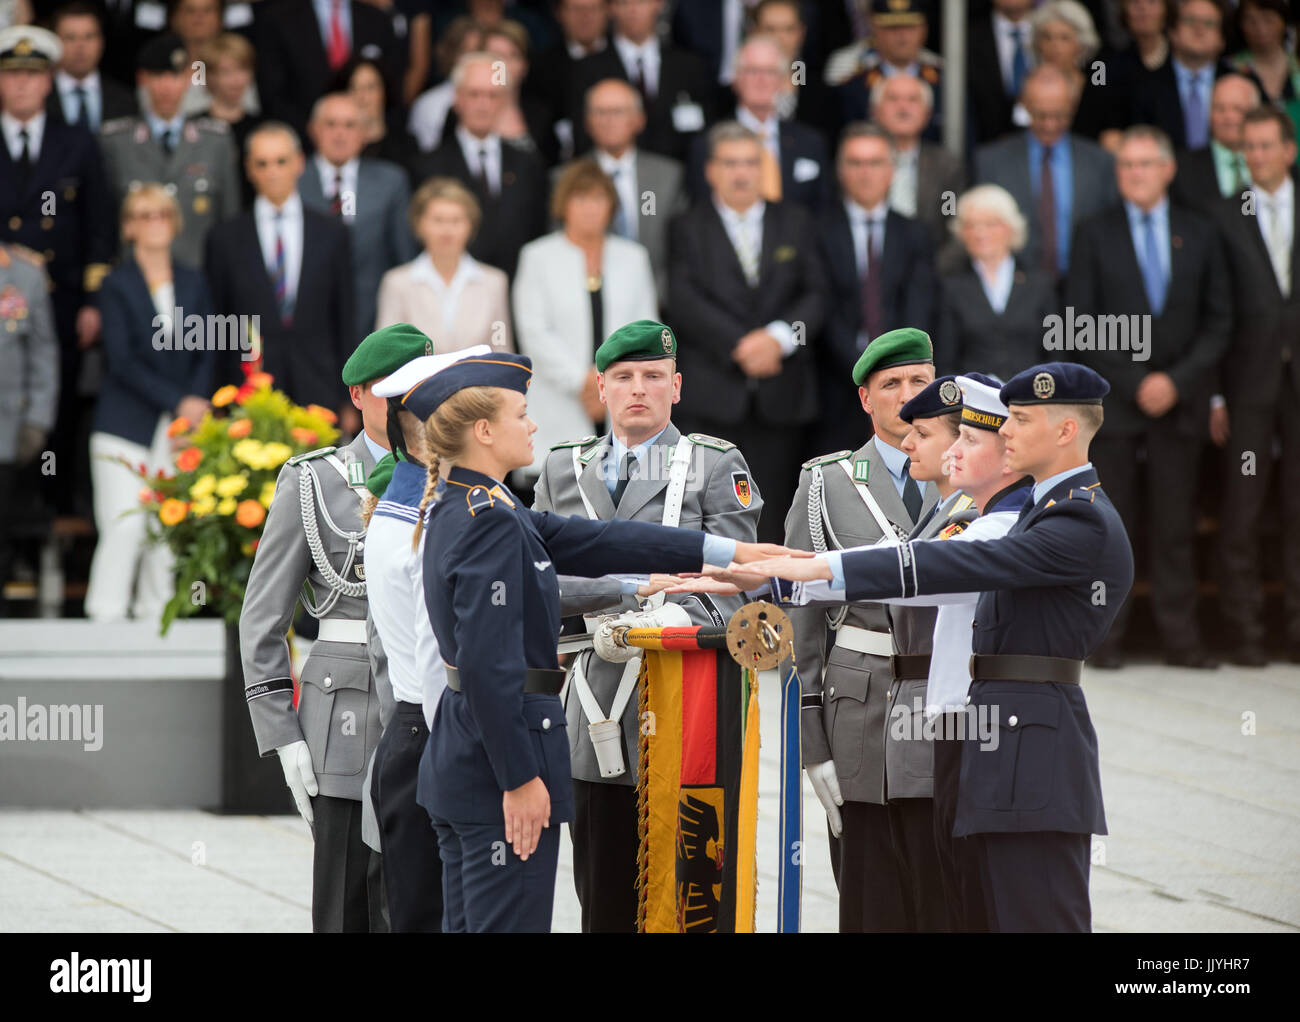 Berlin, Germany. 20th July, 2017. A group of recruits is sworn in on the Bendlerblock parade ground in Berlin, Germany, 20 July 2017. 400 recruits were sworn in during a ceremony on the 73rd anniversary of the 20 July plot, an attempt launched by a group of conspirators to assassinate Adolf Hitler, leader of Nazi Germany at that time. Photo: Soeren Stache/dpa/Alamy Live News Stock Photo